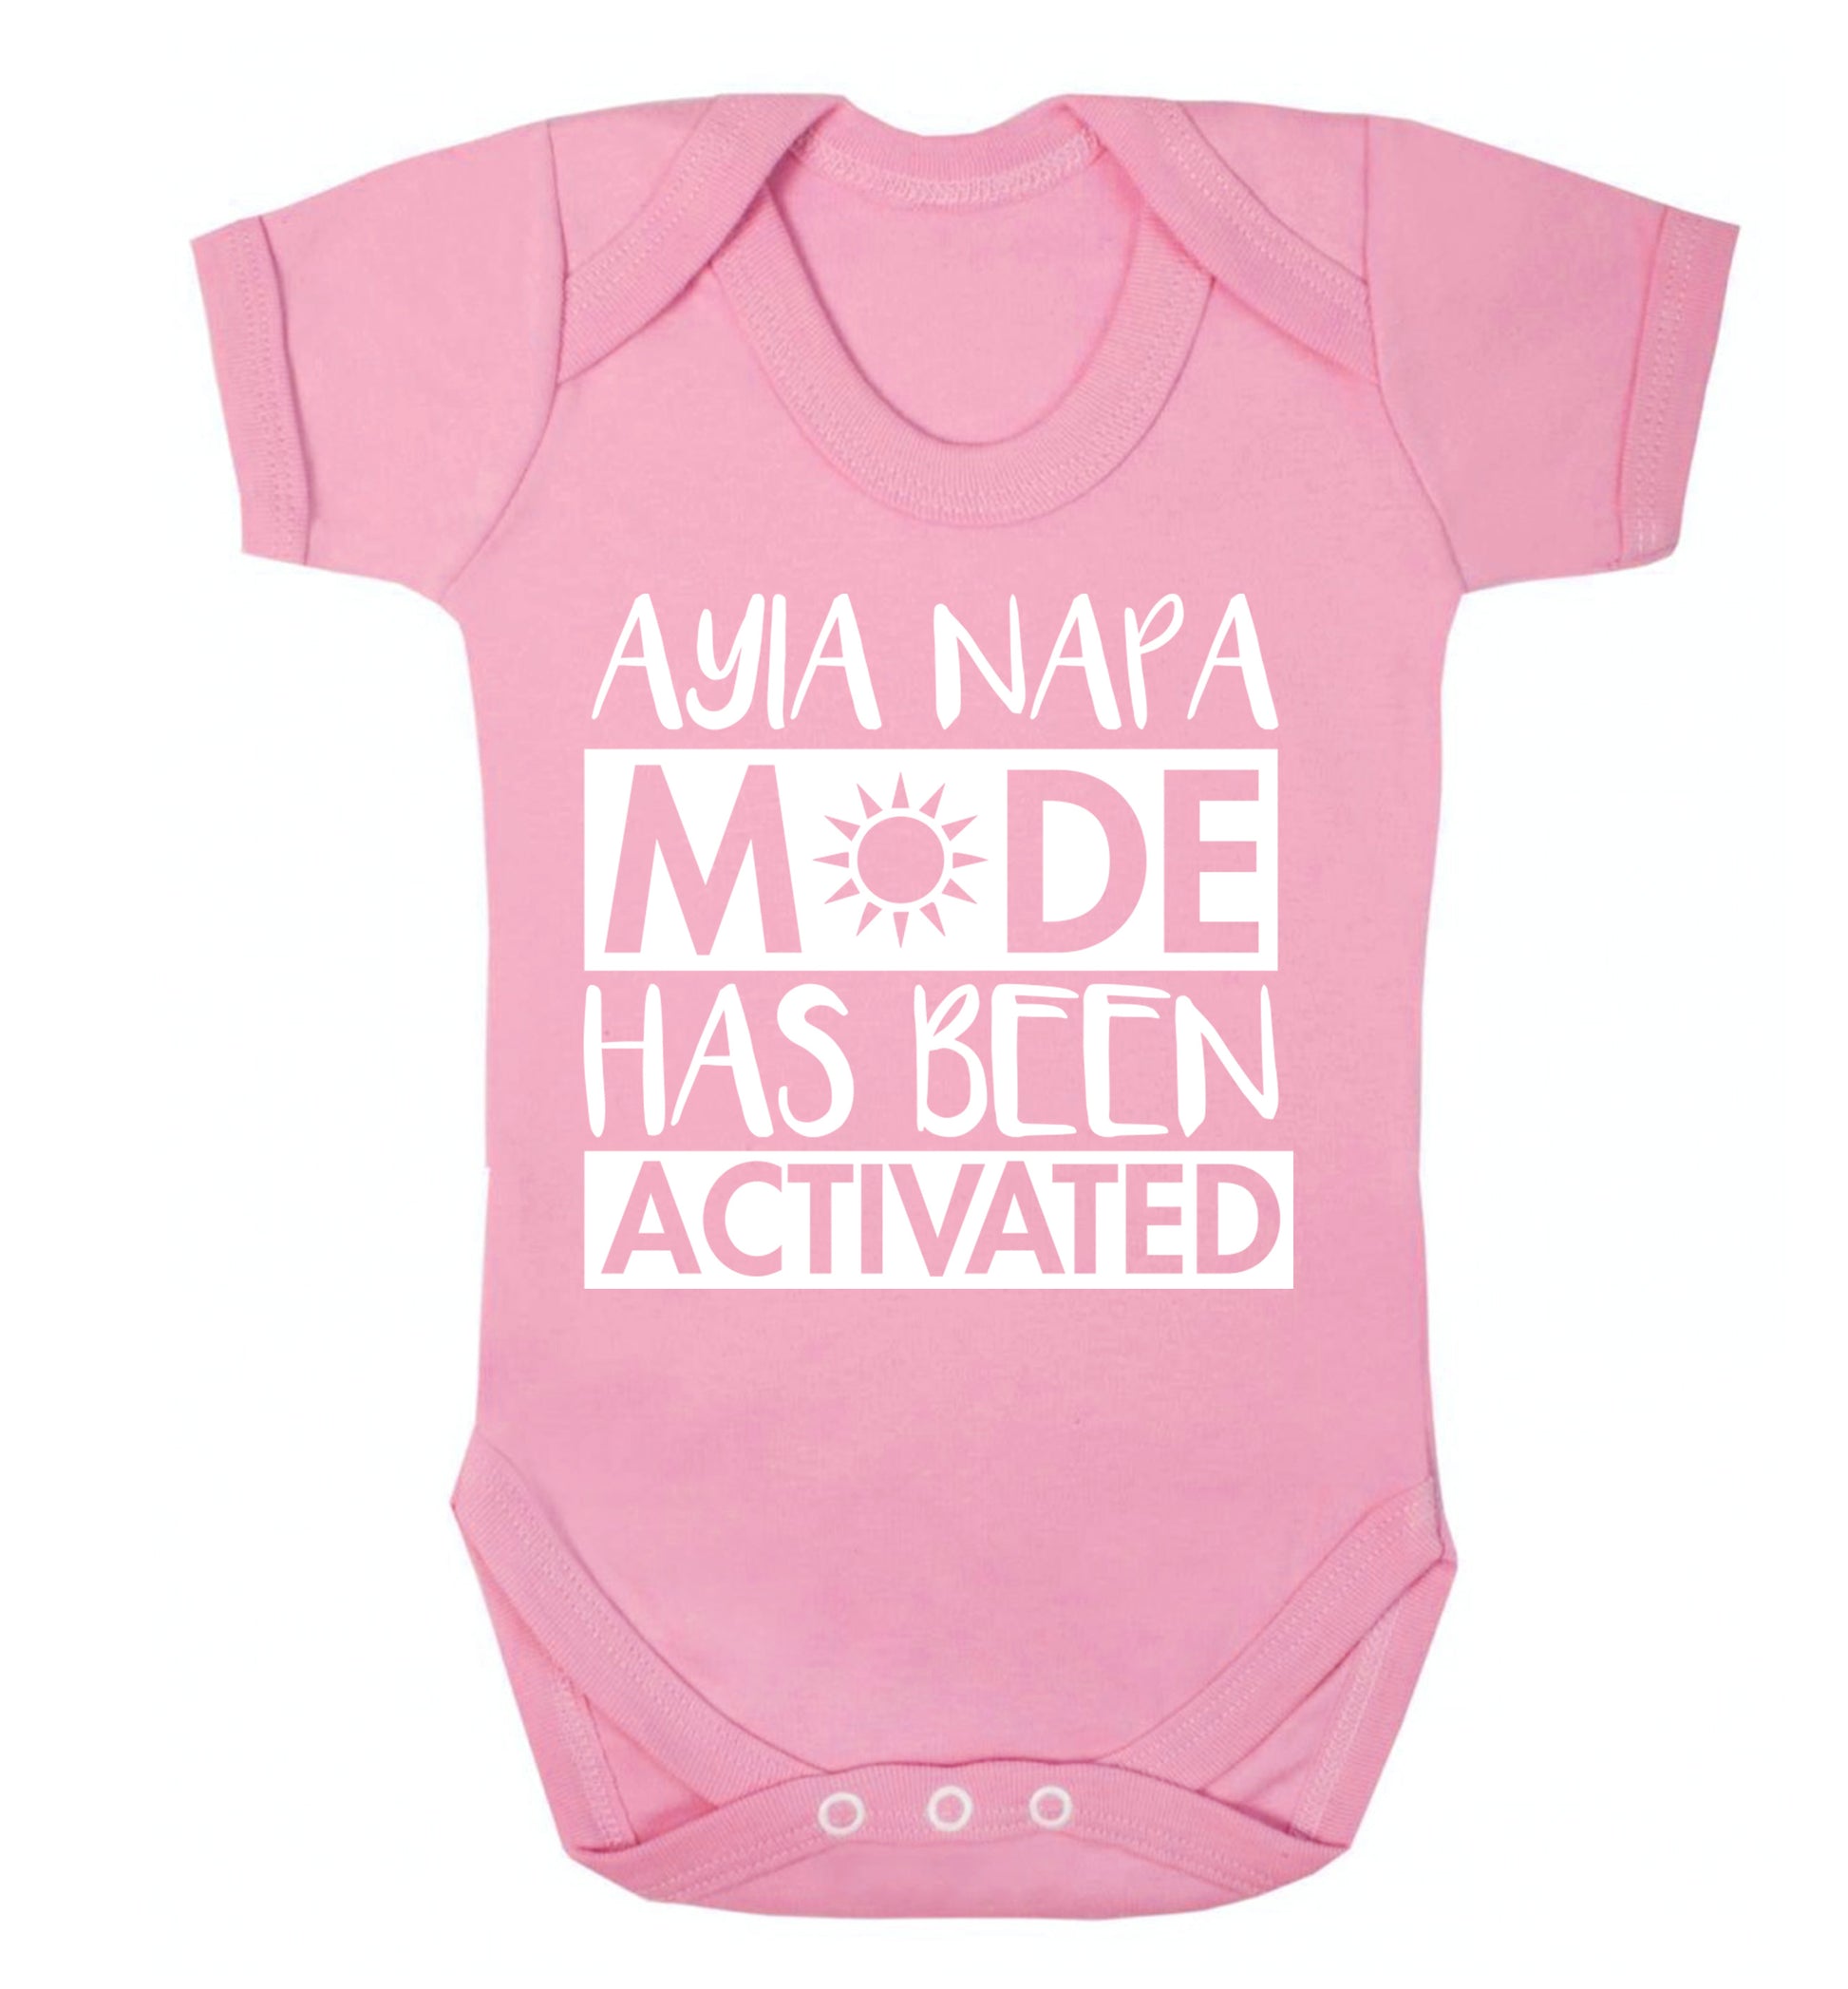 Ayia Napa mode has been activated Baby Vest pale pink 18-24 months